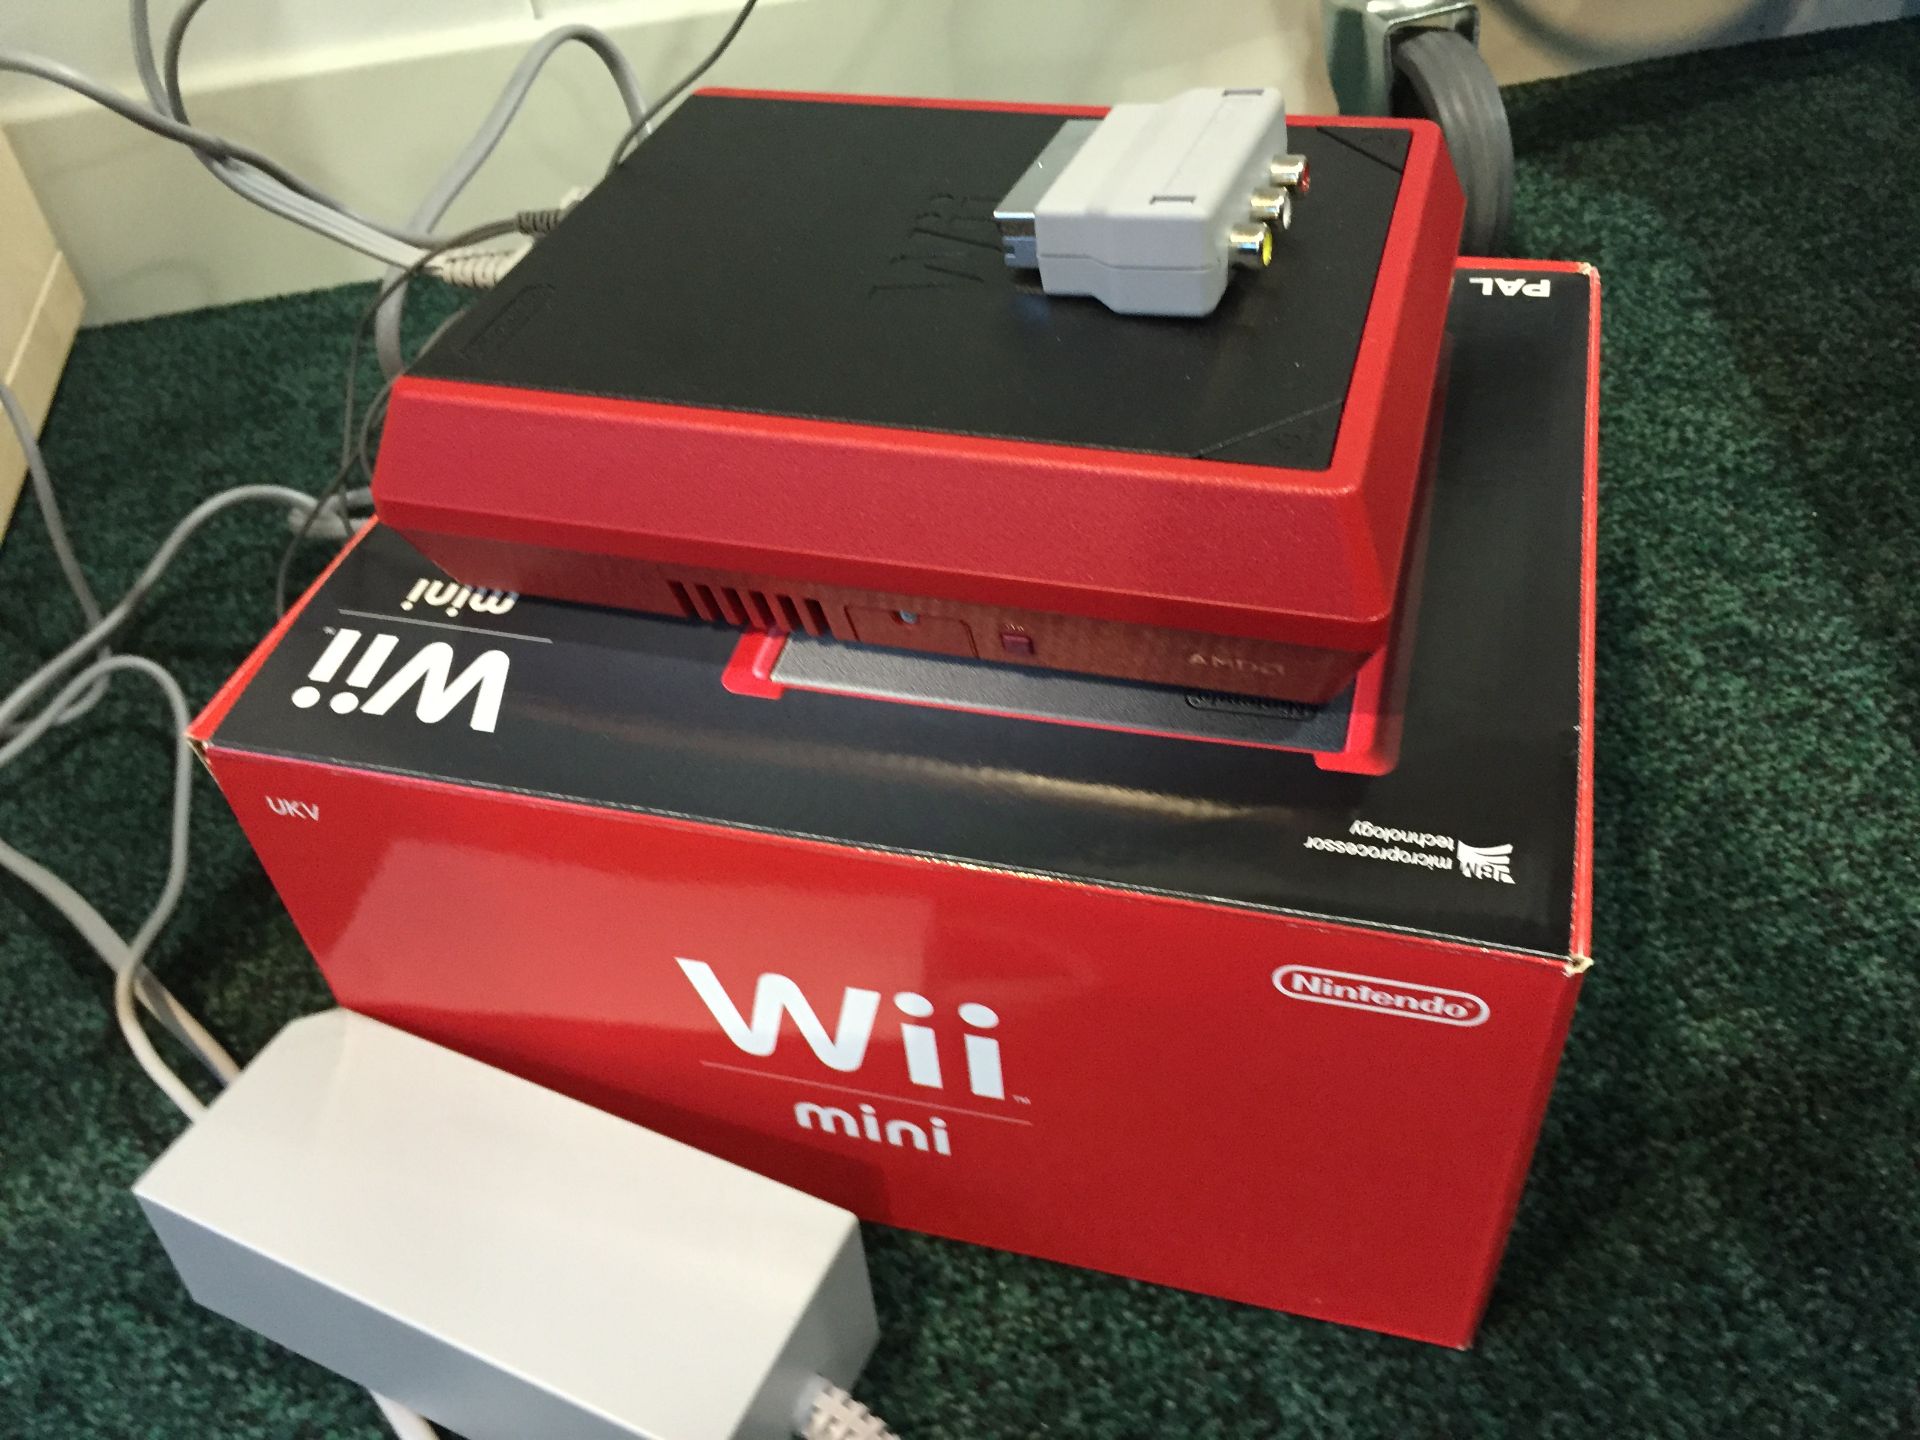 1 x Nintendo Wii Mini Red Games Console With 3 Nunchucks - Fully Boxed With Power Pack and TV Cables - Image 3 of 4